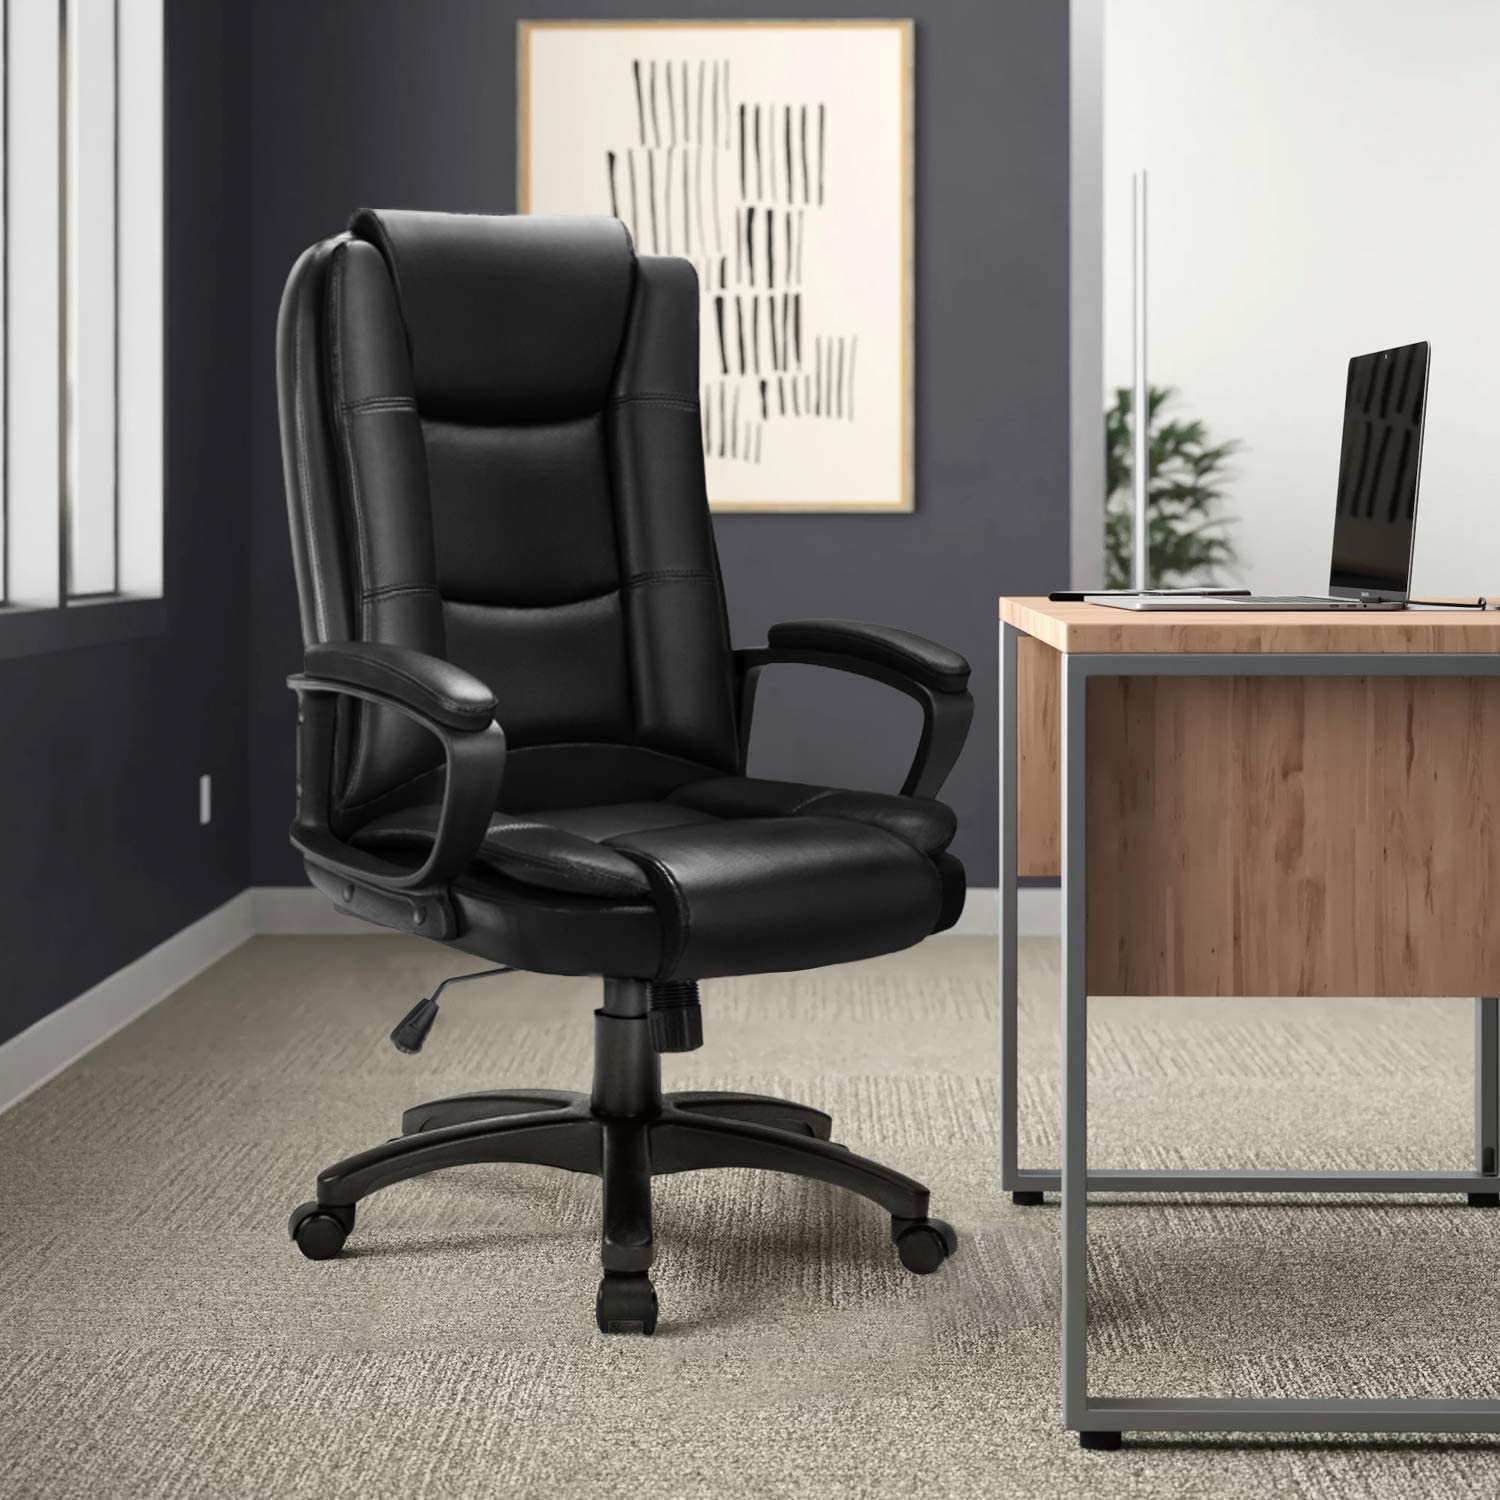 Vitesse Home Office Chair, Big and Tall Chair 8 Hours 400 LBS Heavy Duty Design, Ergonomic High Back Cushion Lumbar Back Support, Computer Desk Chair, Adjustable Executive Leather Chair With Arms - image 2 of 7